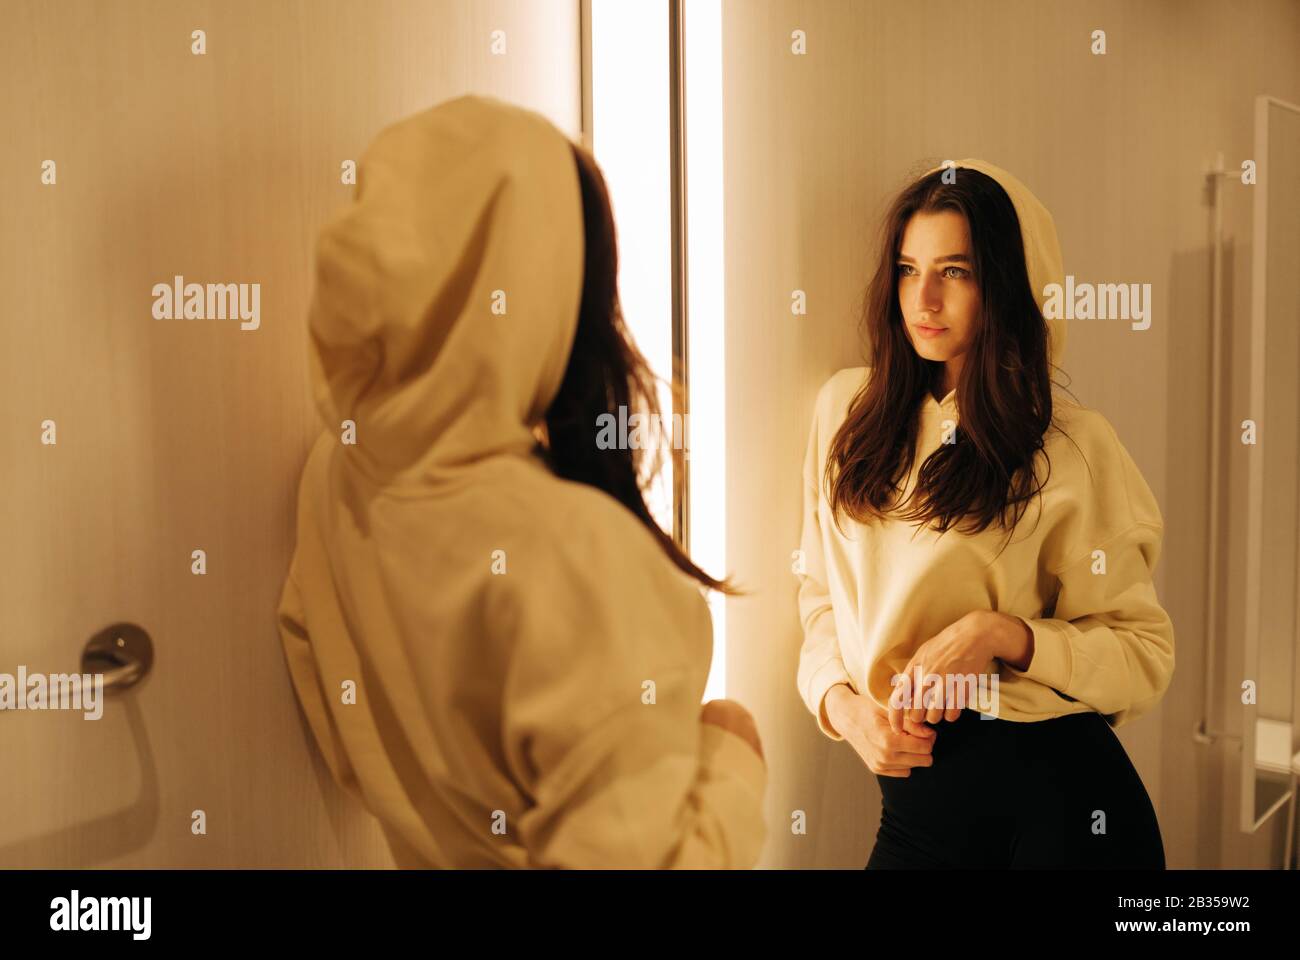 young woman in the fitting room Stock Photo